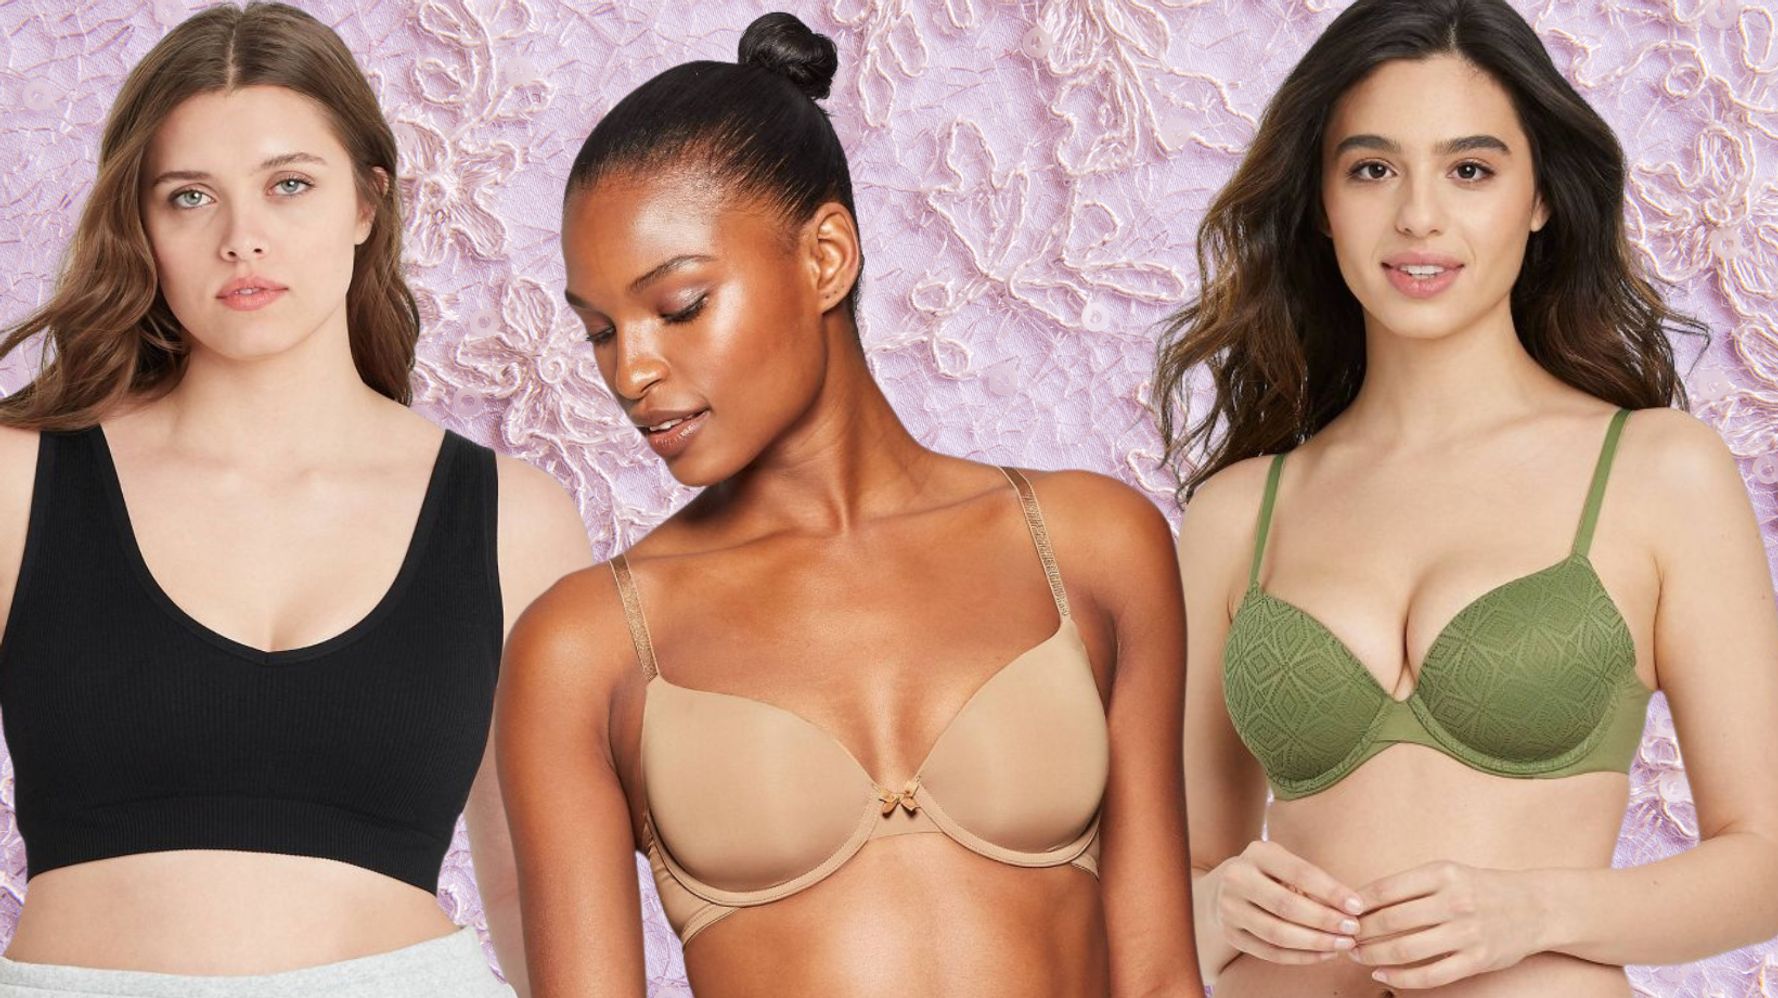 Lift And Support Bras : Target